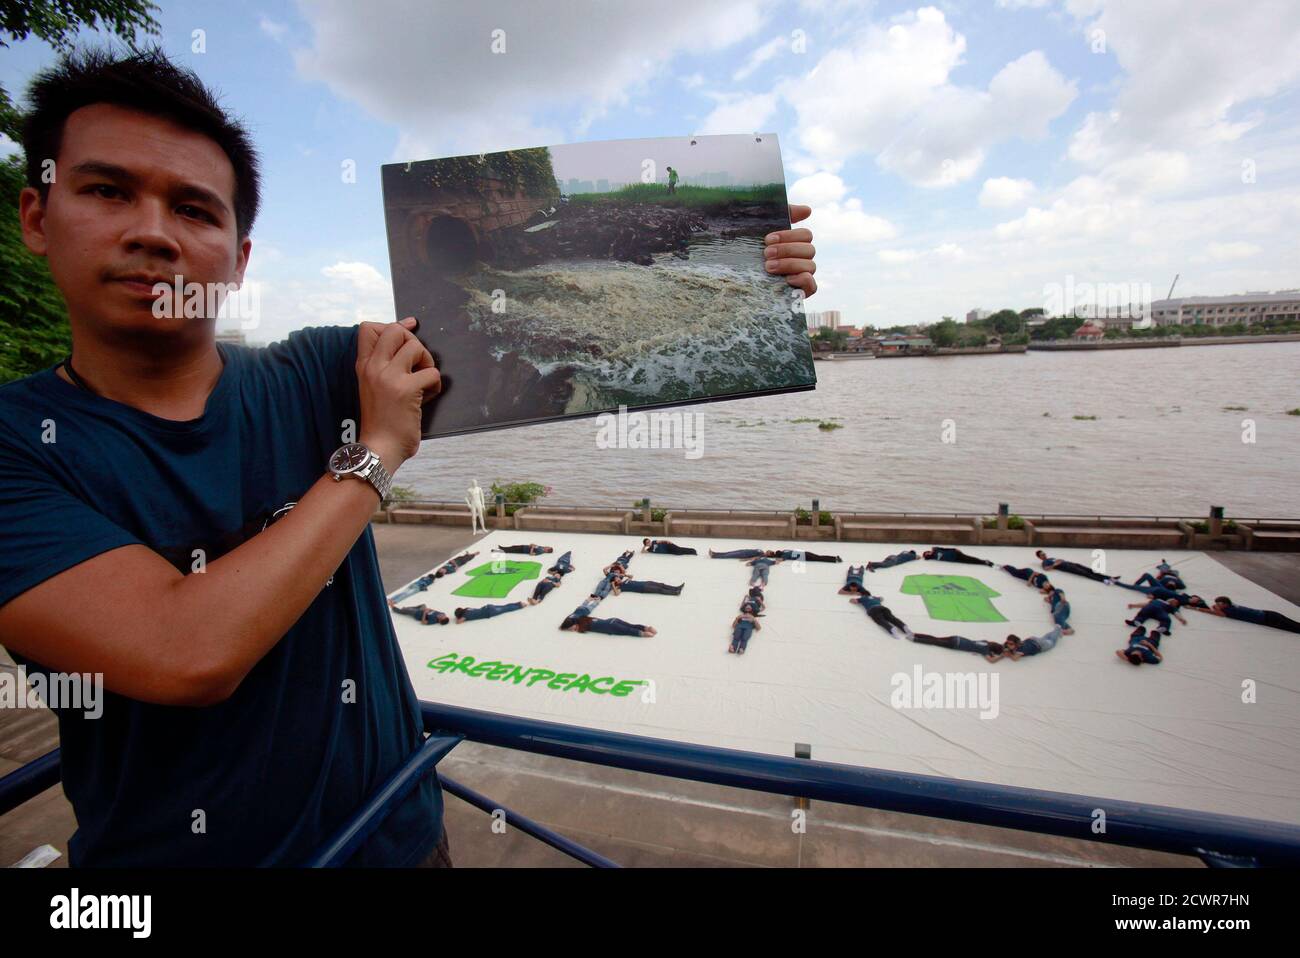 A Greenpeace activist shows a picture of what he claims to be waste waters  being released into river in China as others form a human banner with  message "Detox" at Santichaiprakarn Park,